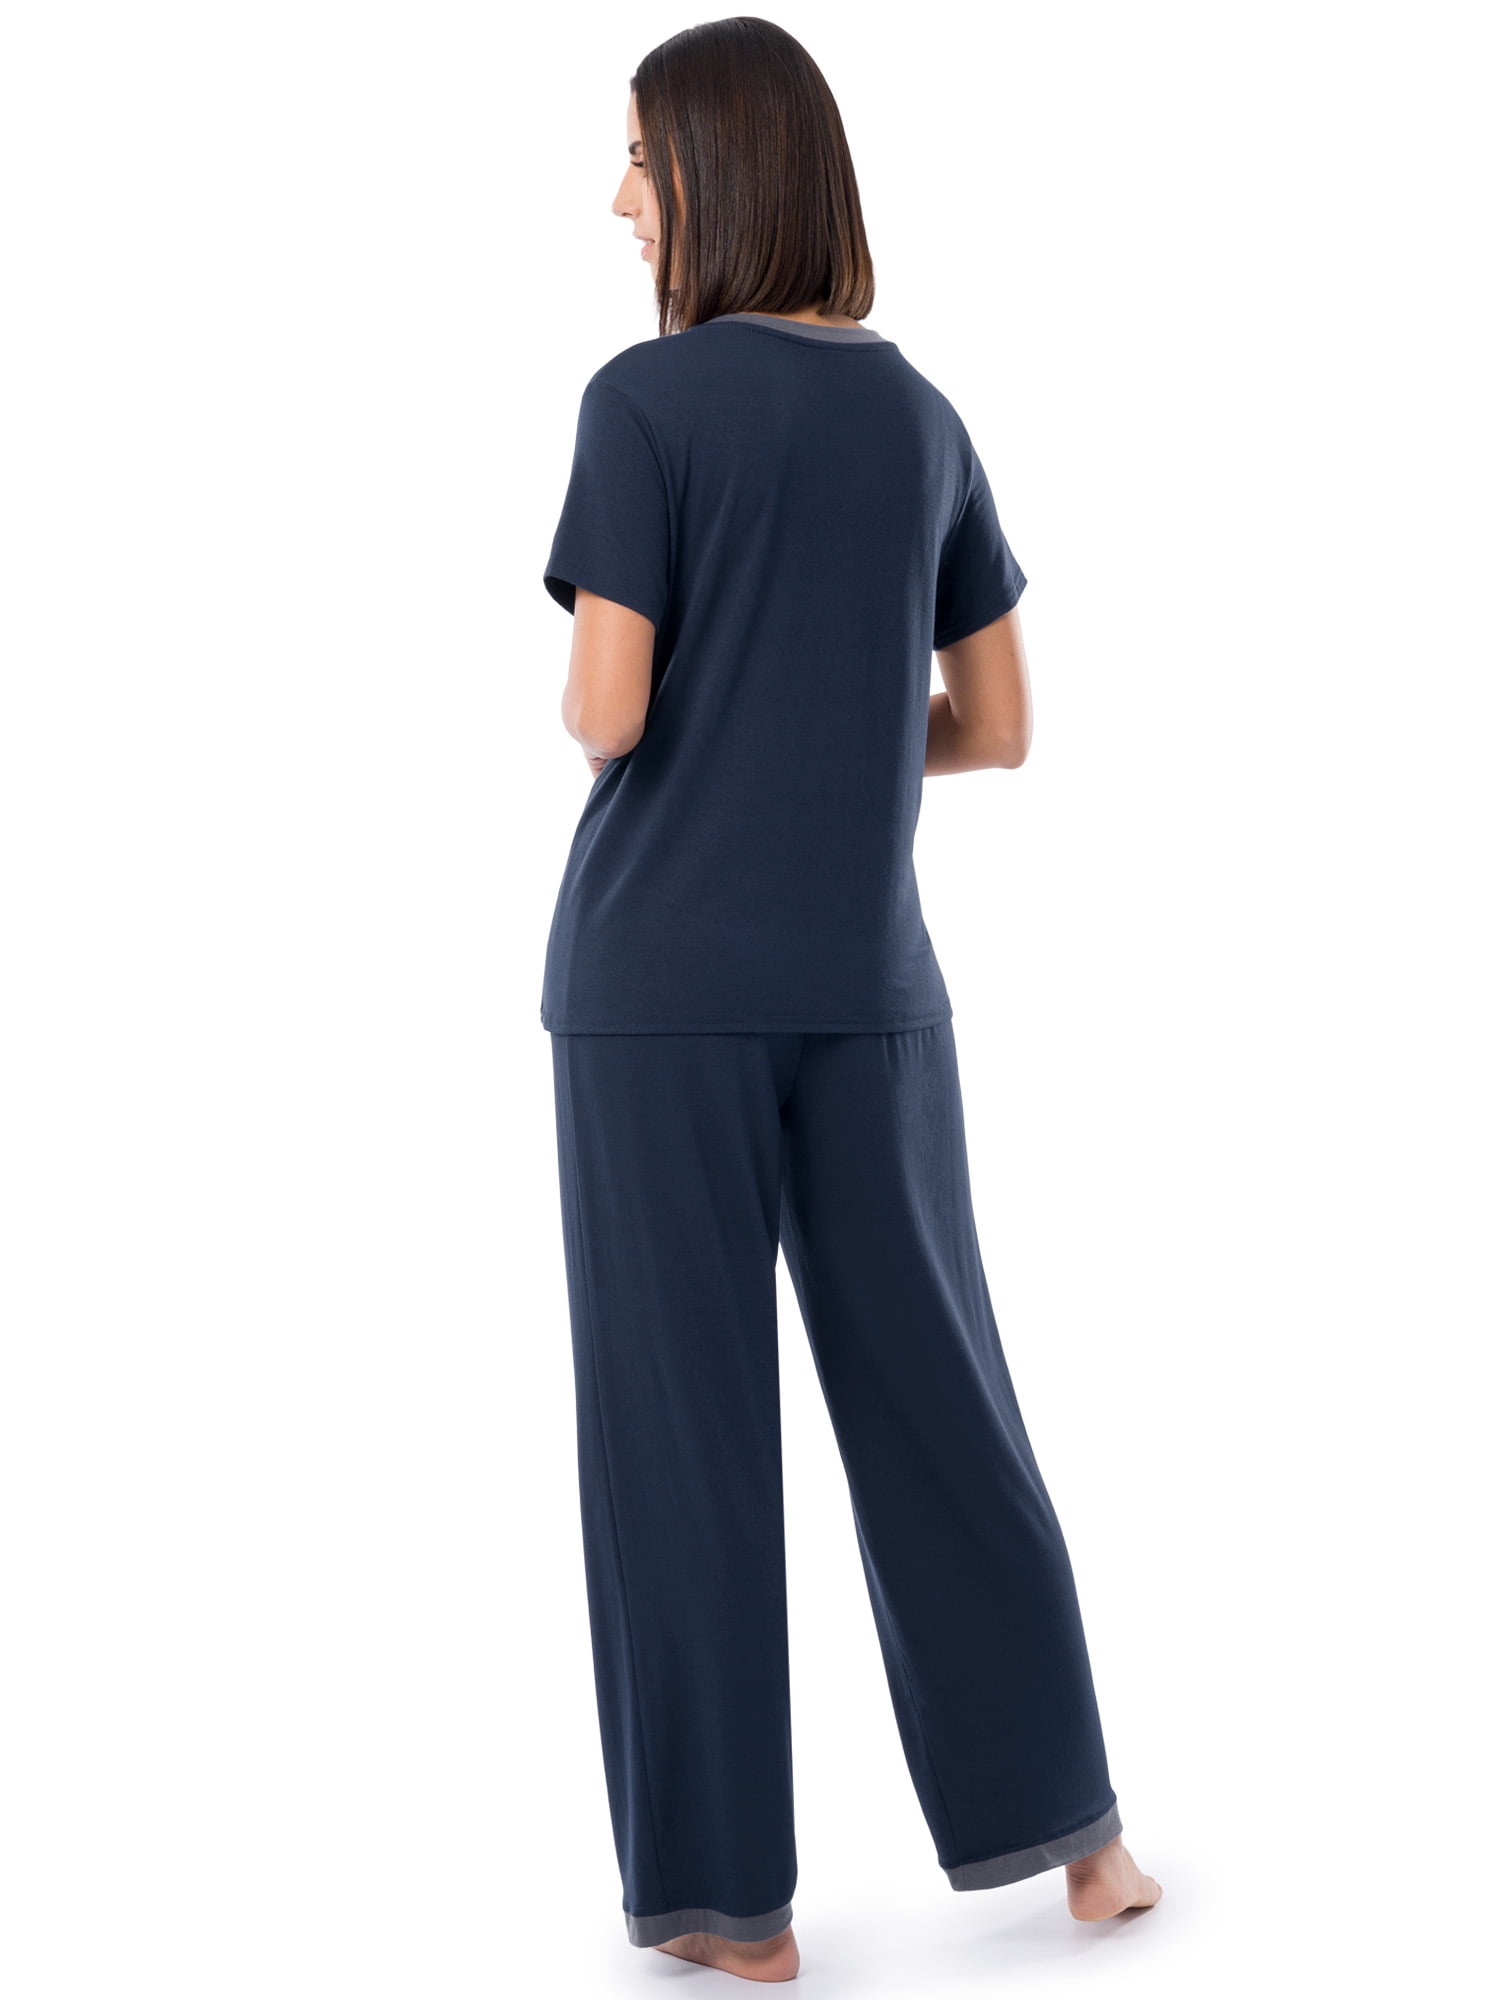 Fruit of the Loom Women's Short Sleeve Cotton Jersey Collared Cropped  Pajama Set, 2-Piece, Sizes S-4X